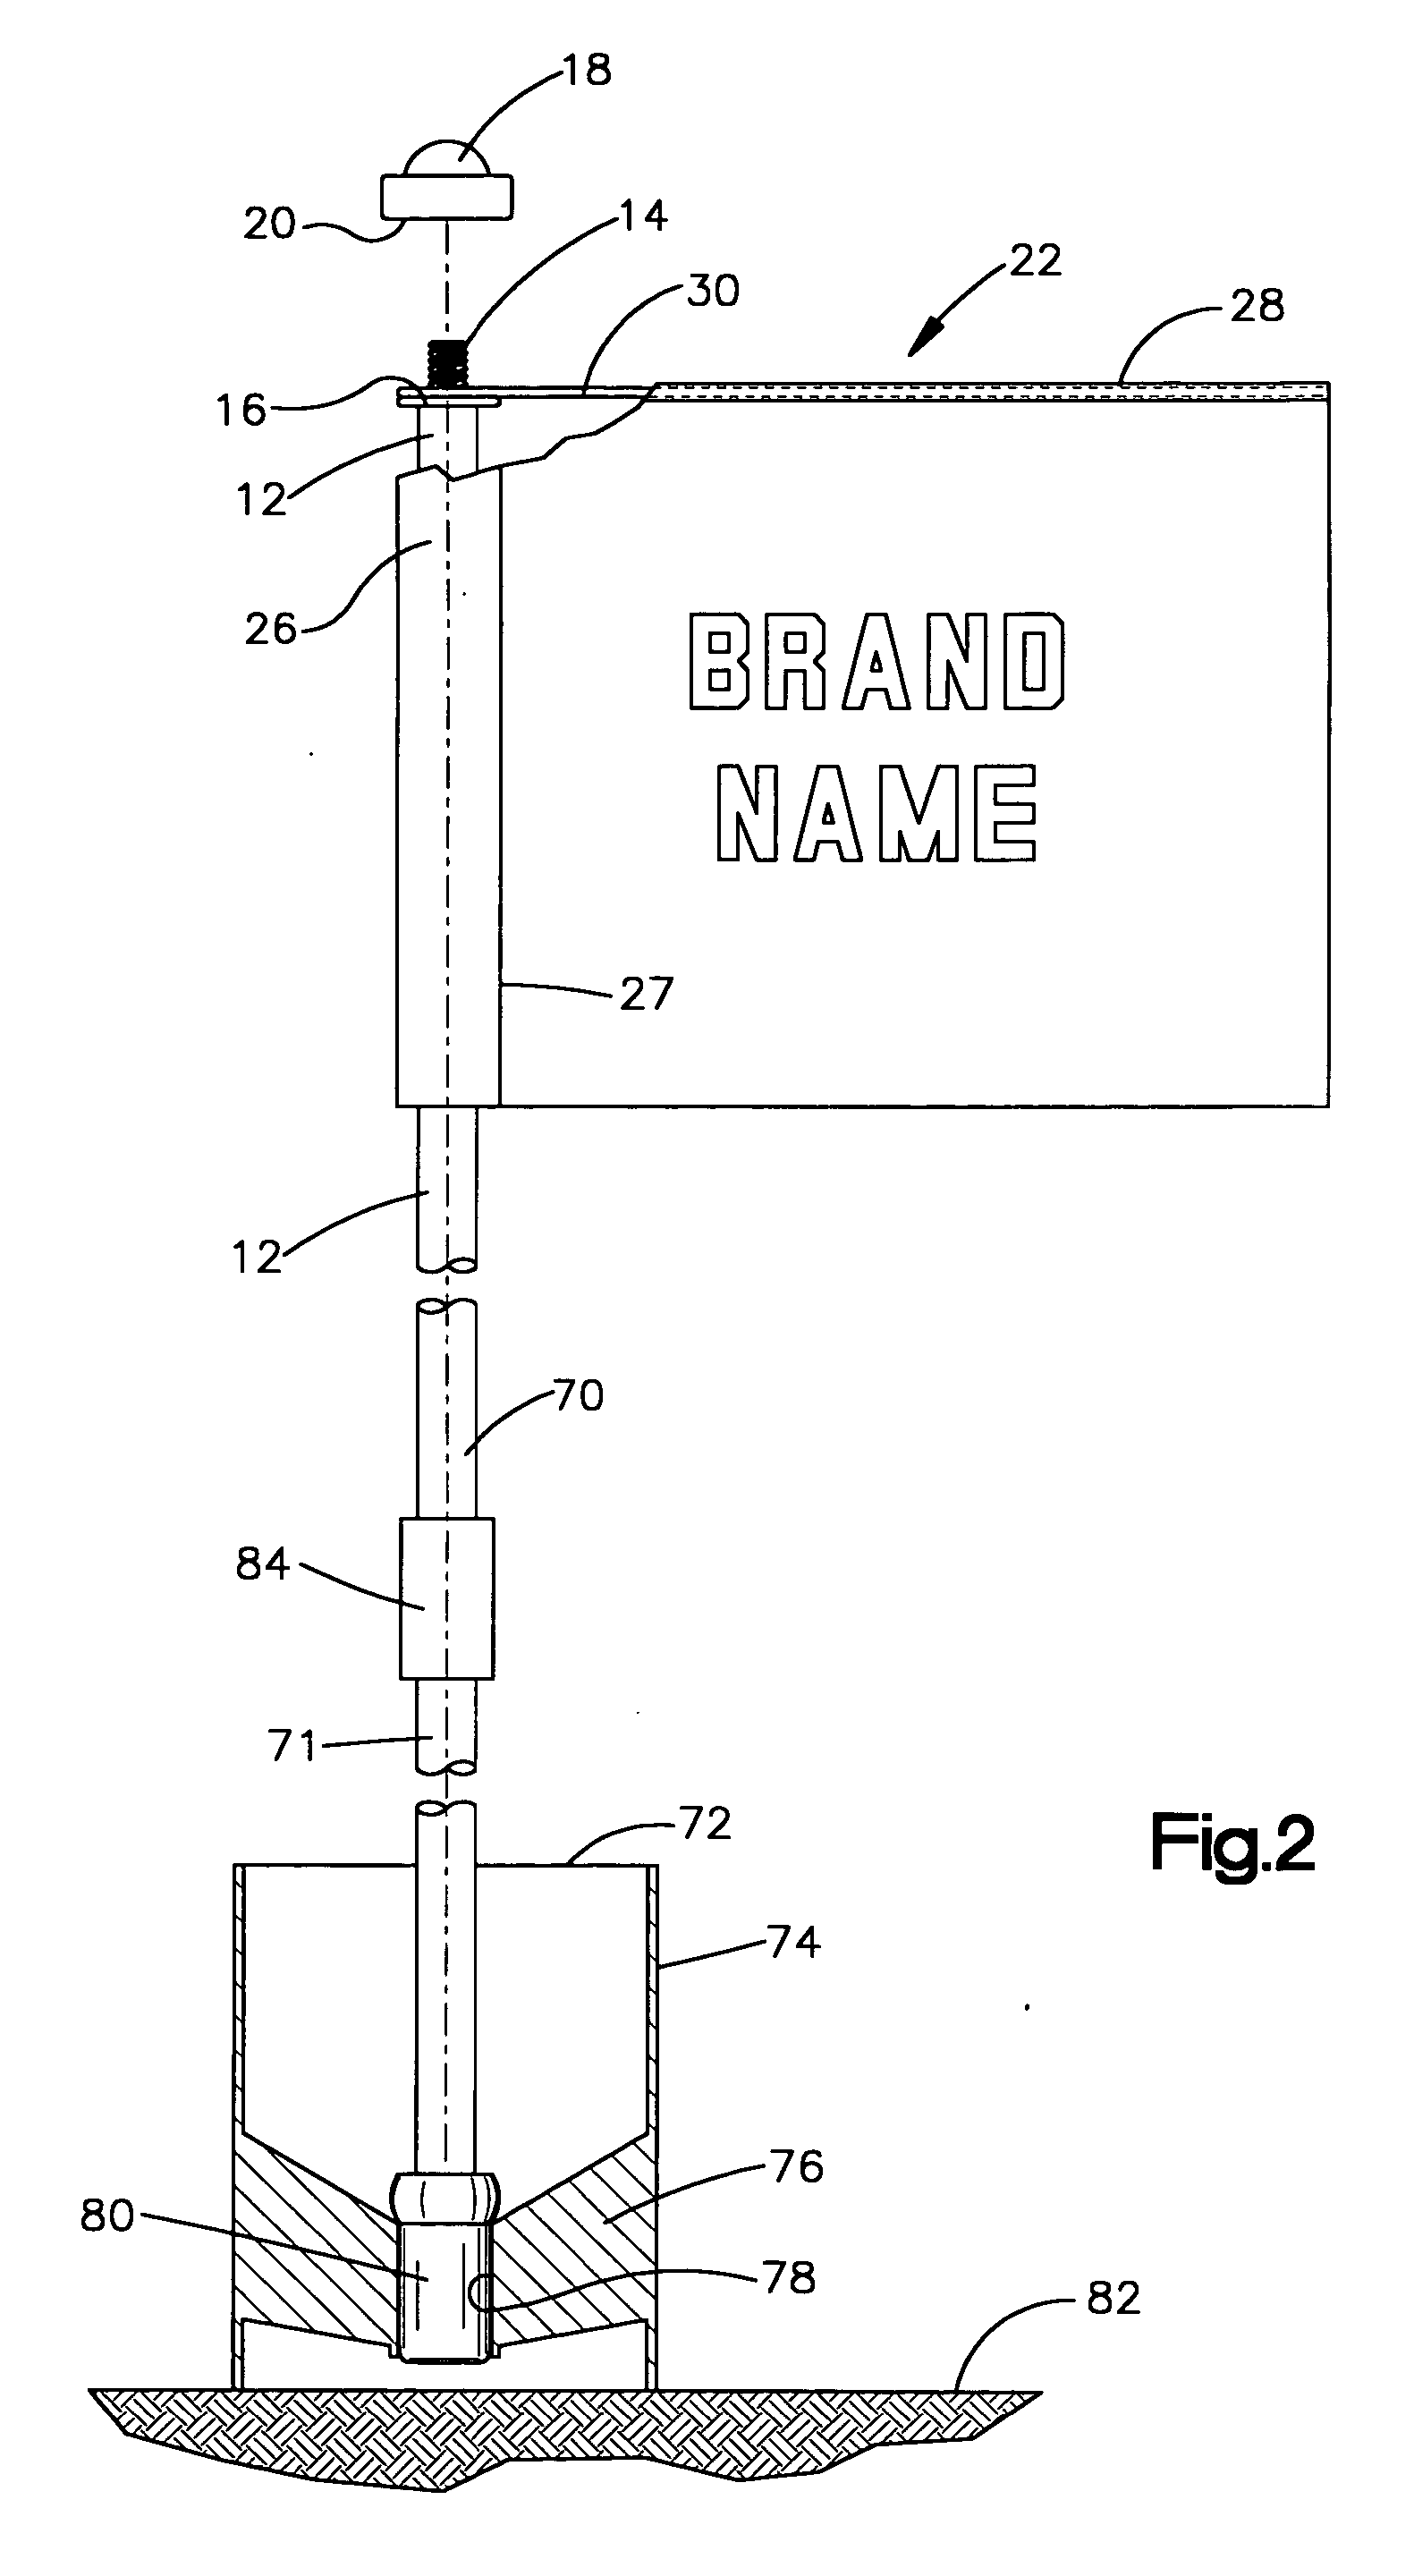 Decorative display flag with horizontally disposed rigid wire for attachment to flag poles for residential and commercial display uses